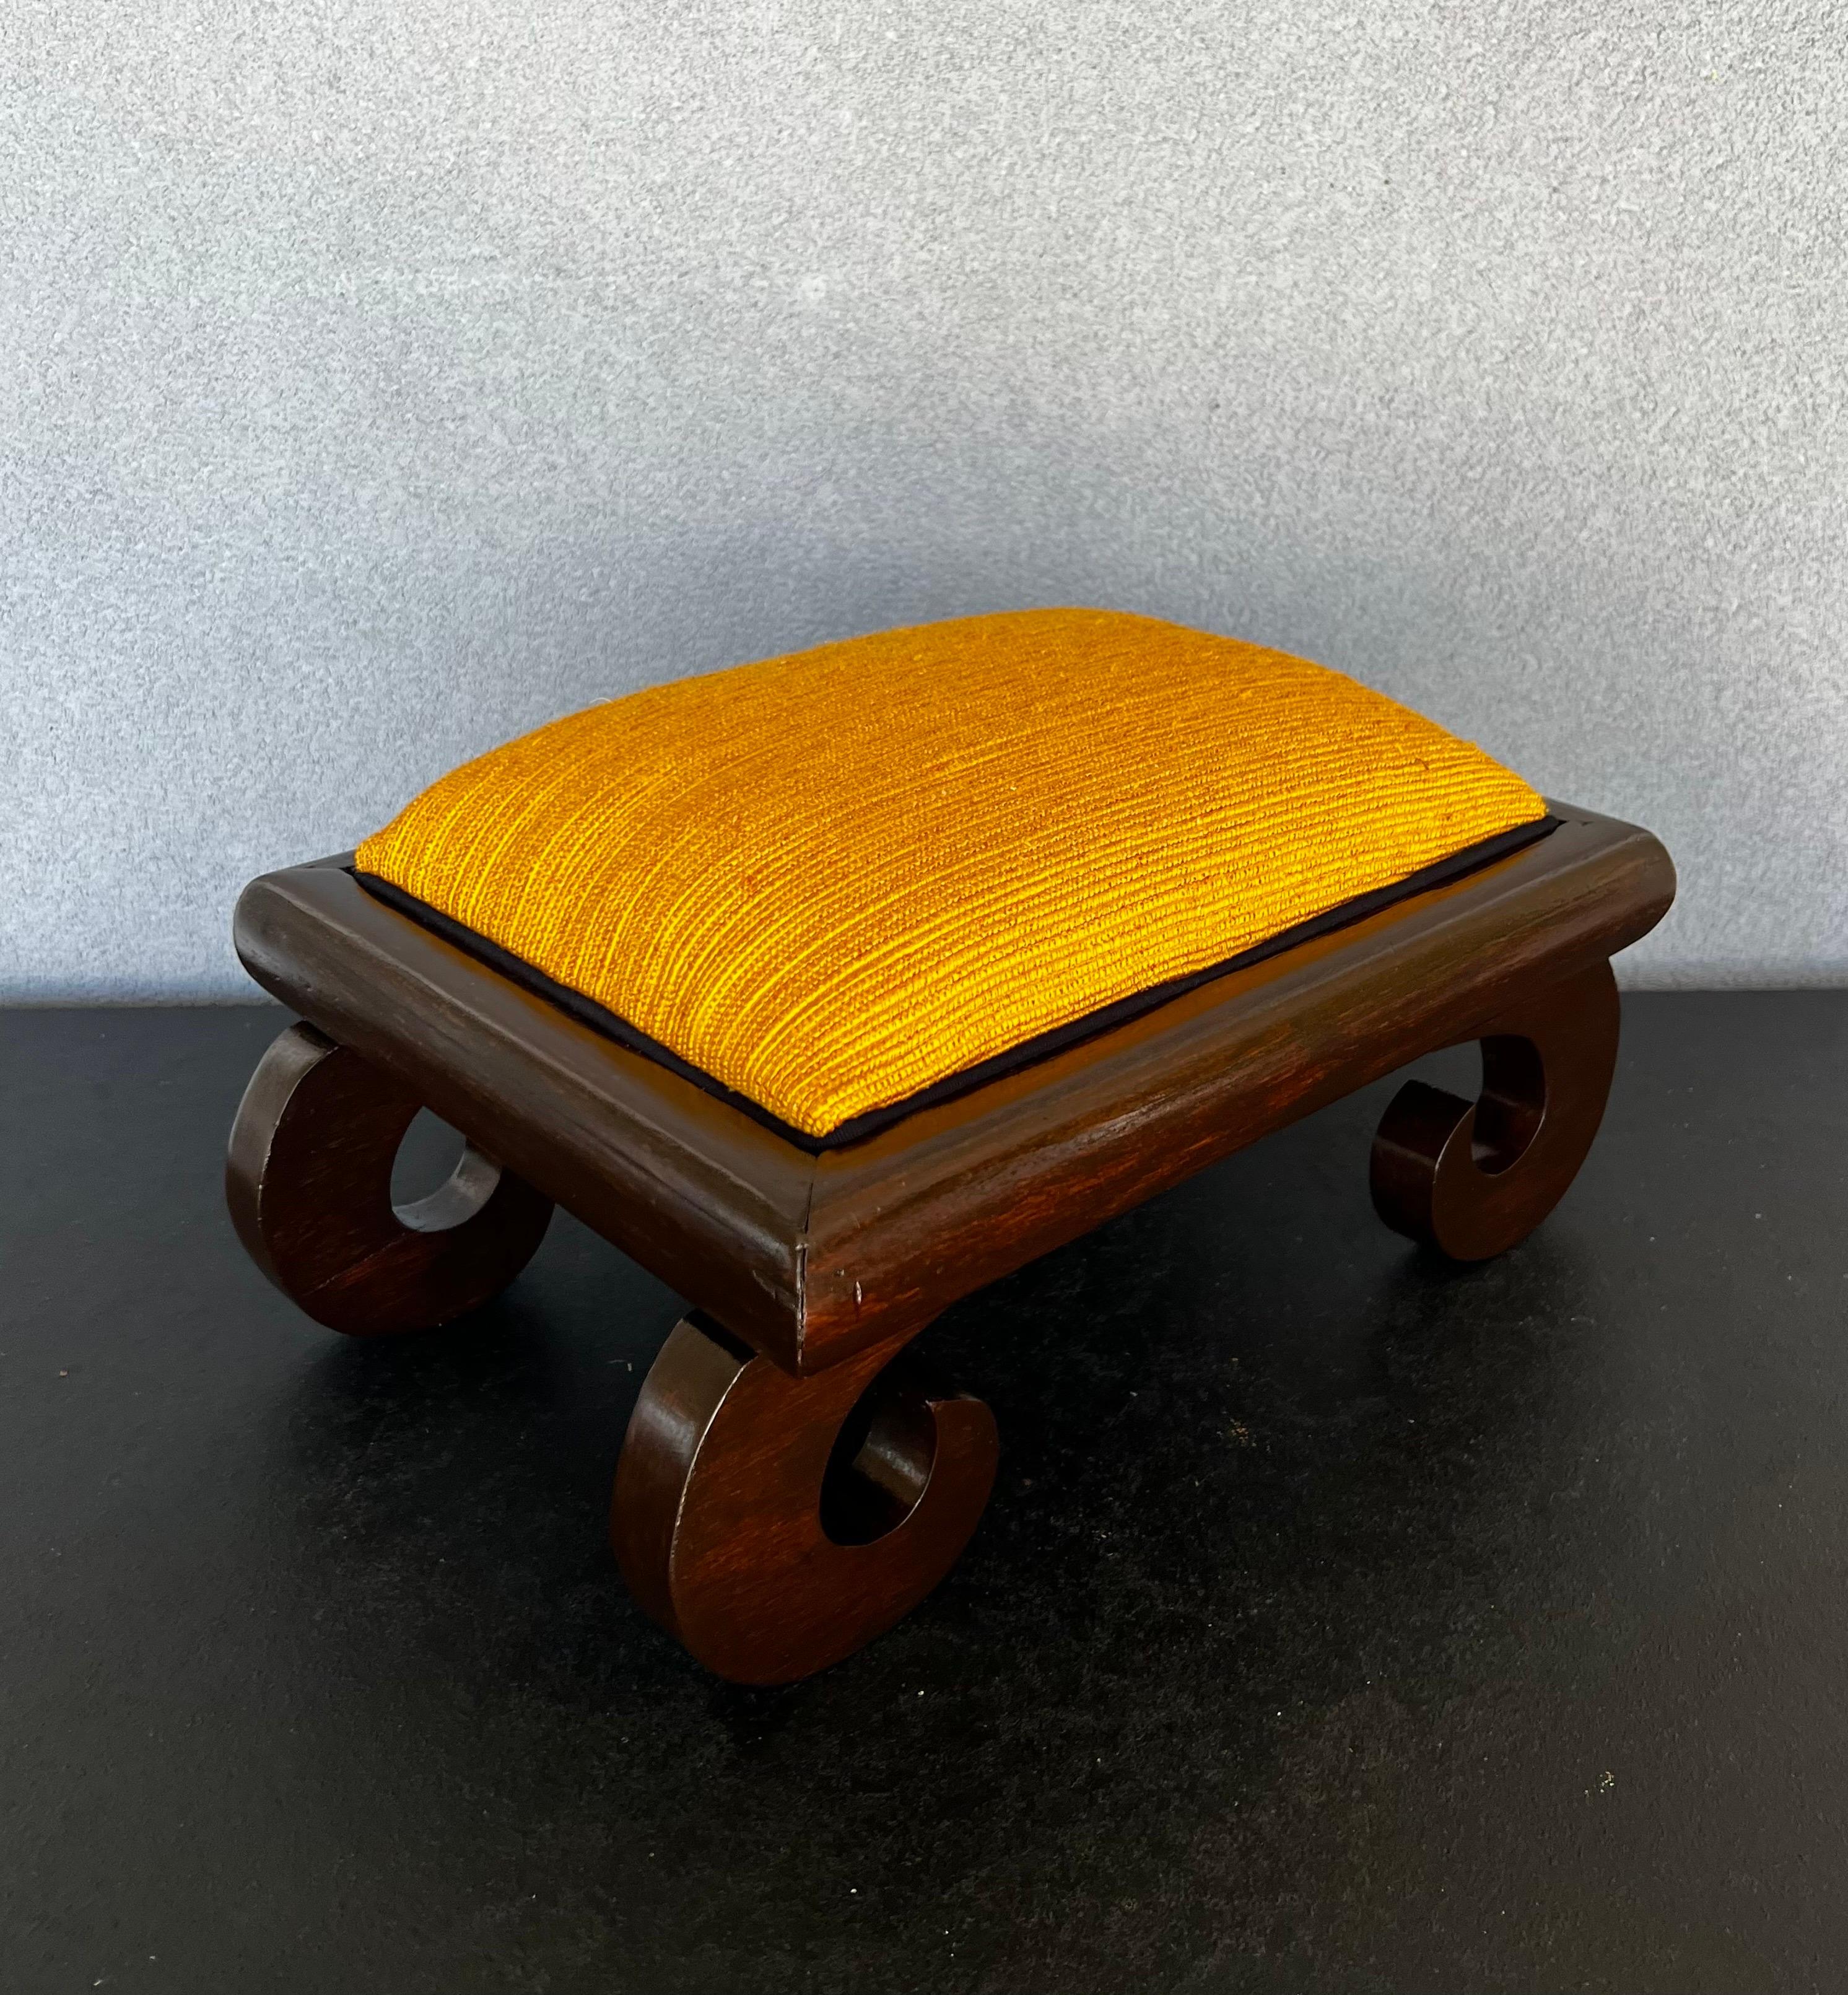 Gorgeous small refinished vintage Asian footstool with scroll legs and gold/orange fabric with accent black velvet piping 
this stool is the perfect addition to any room or bedroom as a finishing touch, it would add a touch of color and would bring